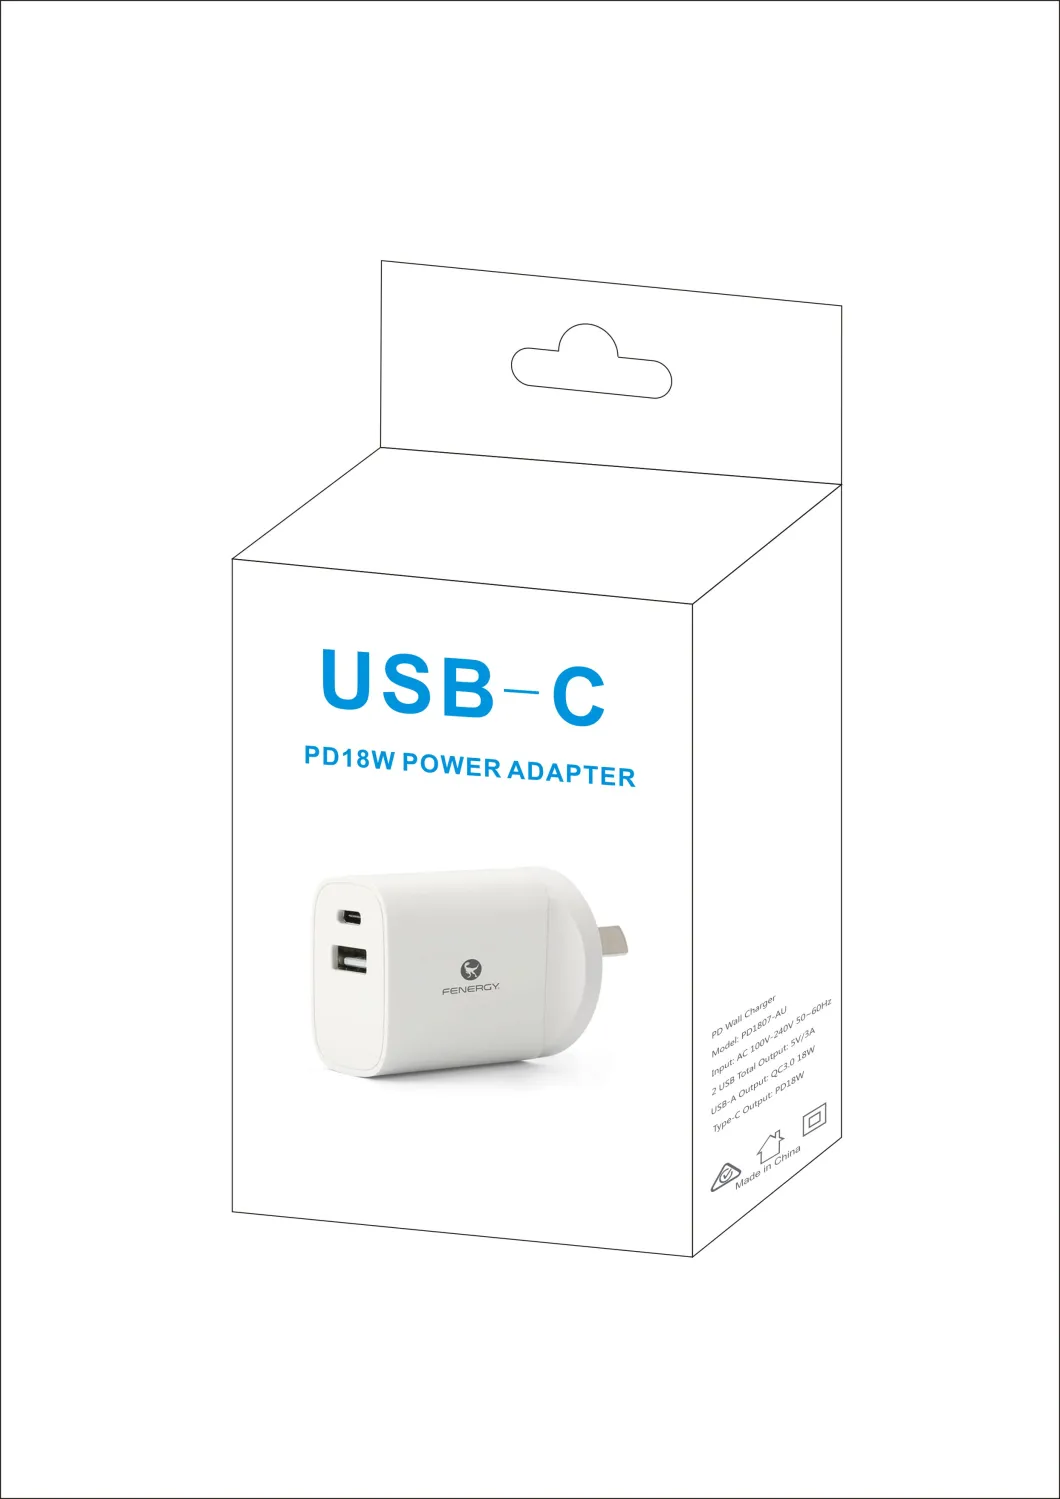 USB Wall Charger Quik Wall Adapter with USB C Pd 18W Mobile Charger Wall Charger